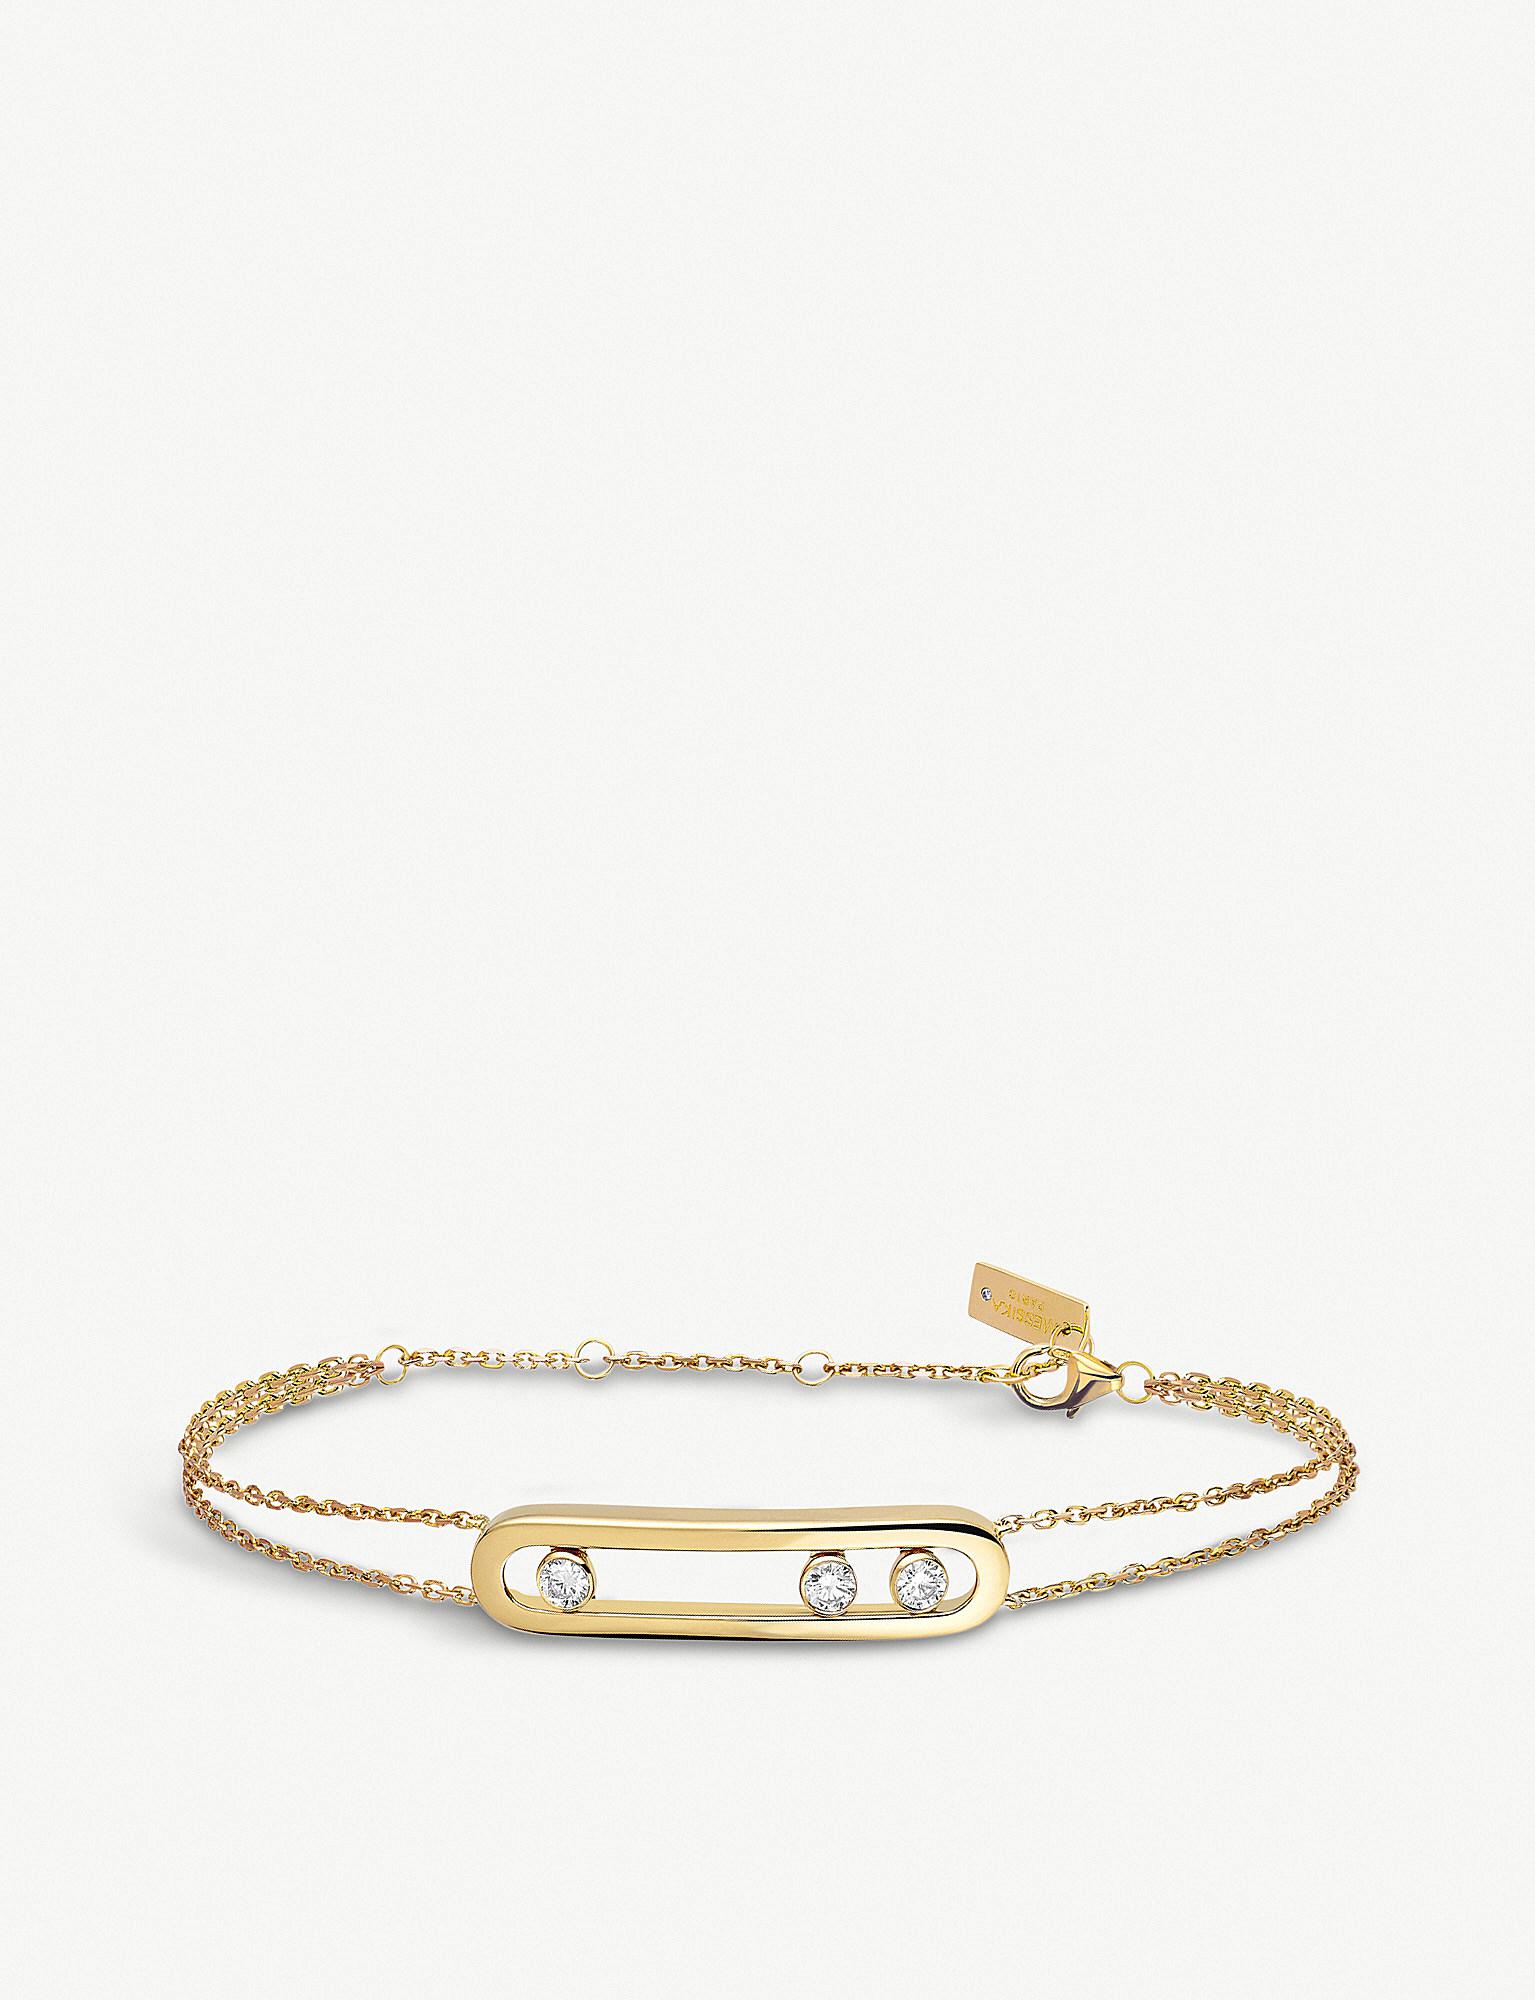 Lyst - Messika Move 18ct Yellow-gold And Diamond Bracelet in Yellow